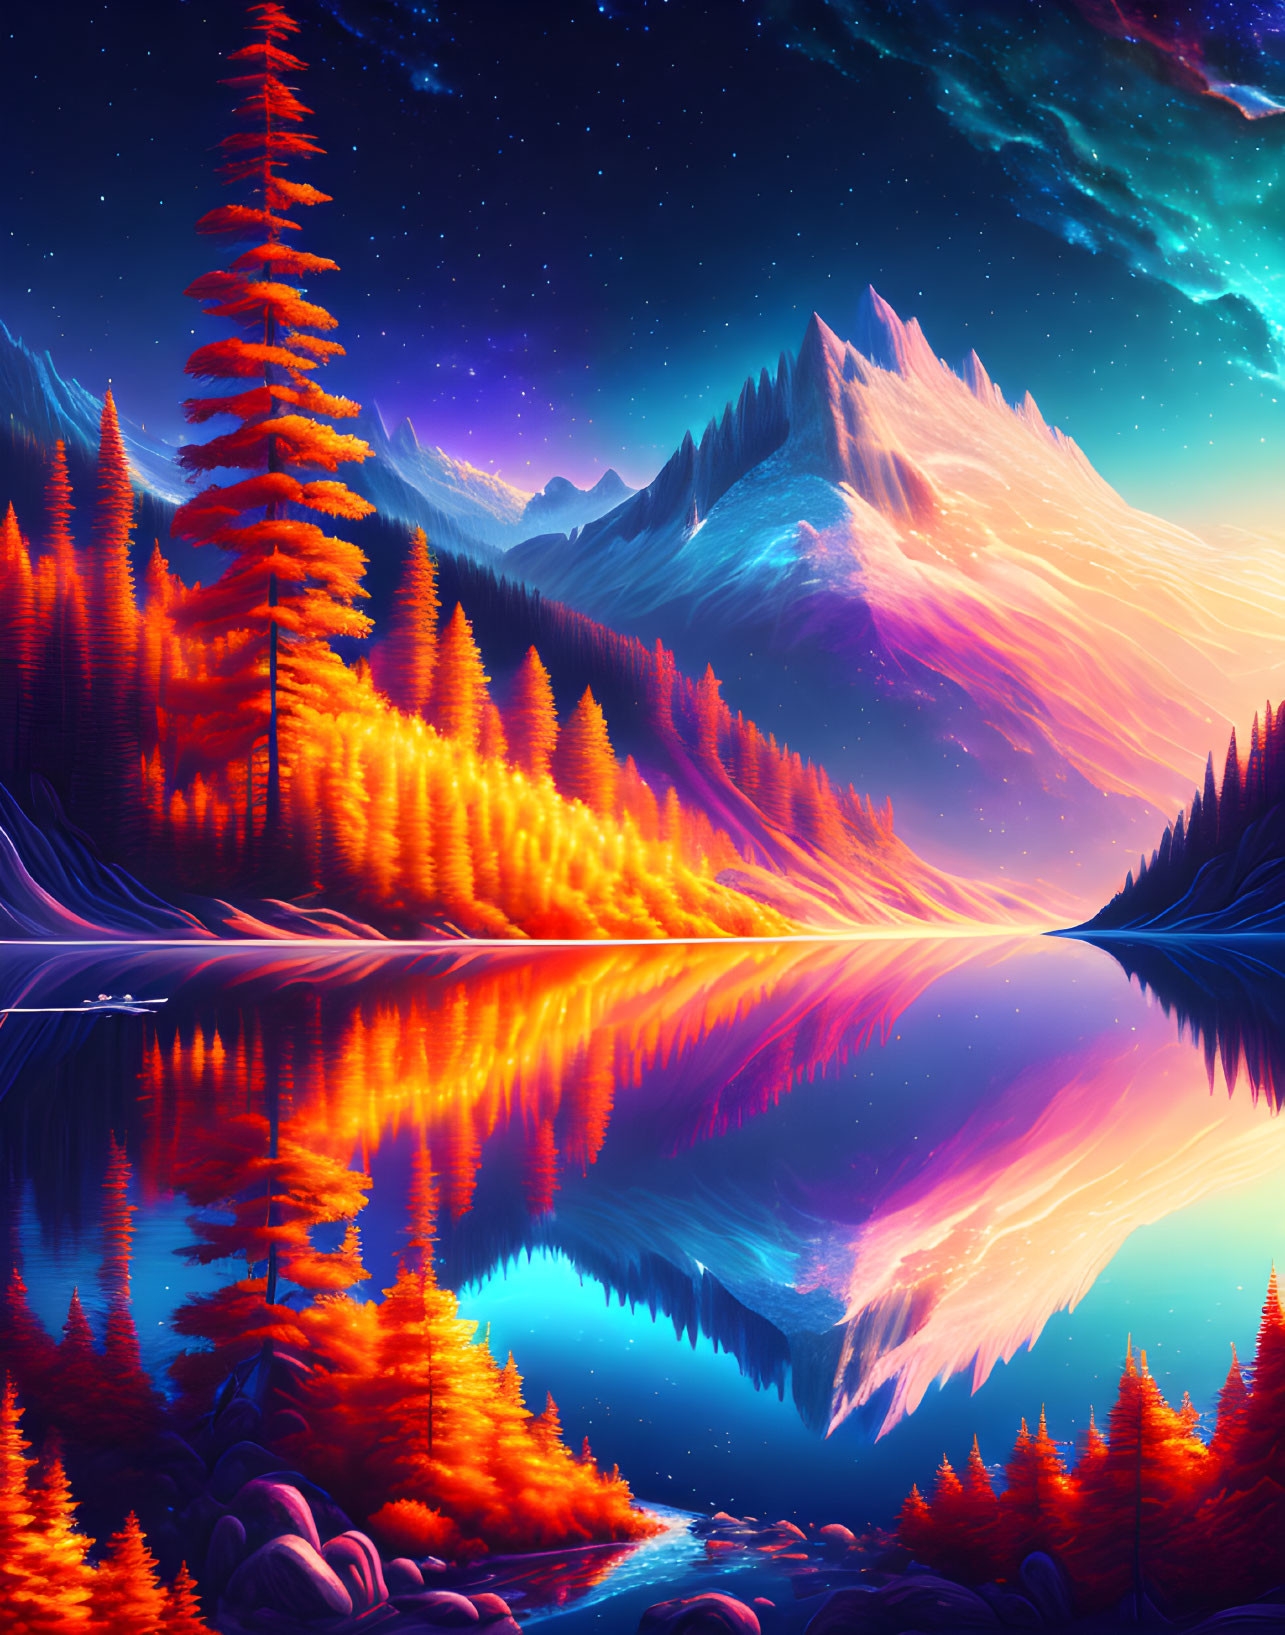 Digital art landscape: Mountain range reflection in tranquil lake, glowing trees under starry night sky with aur